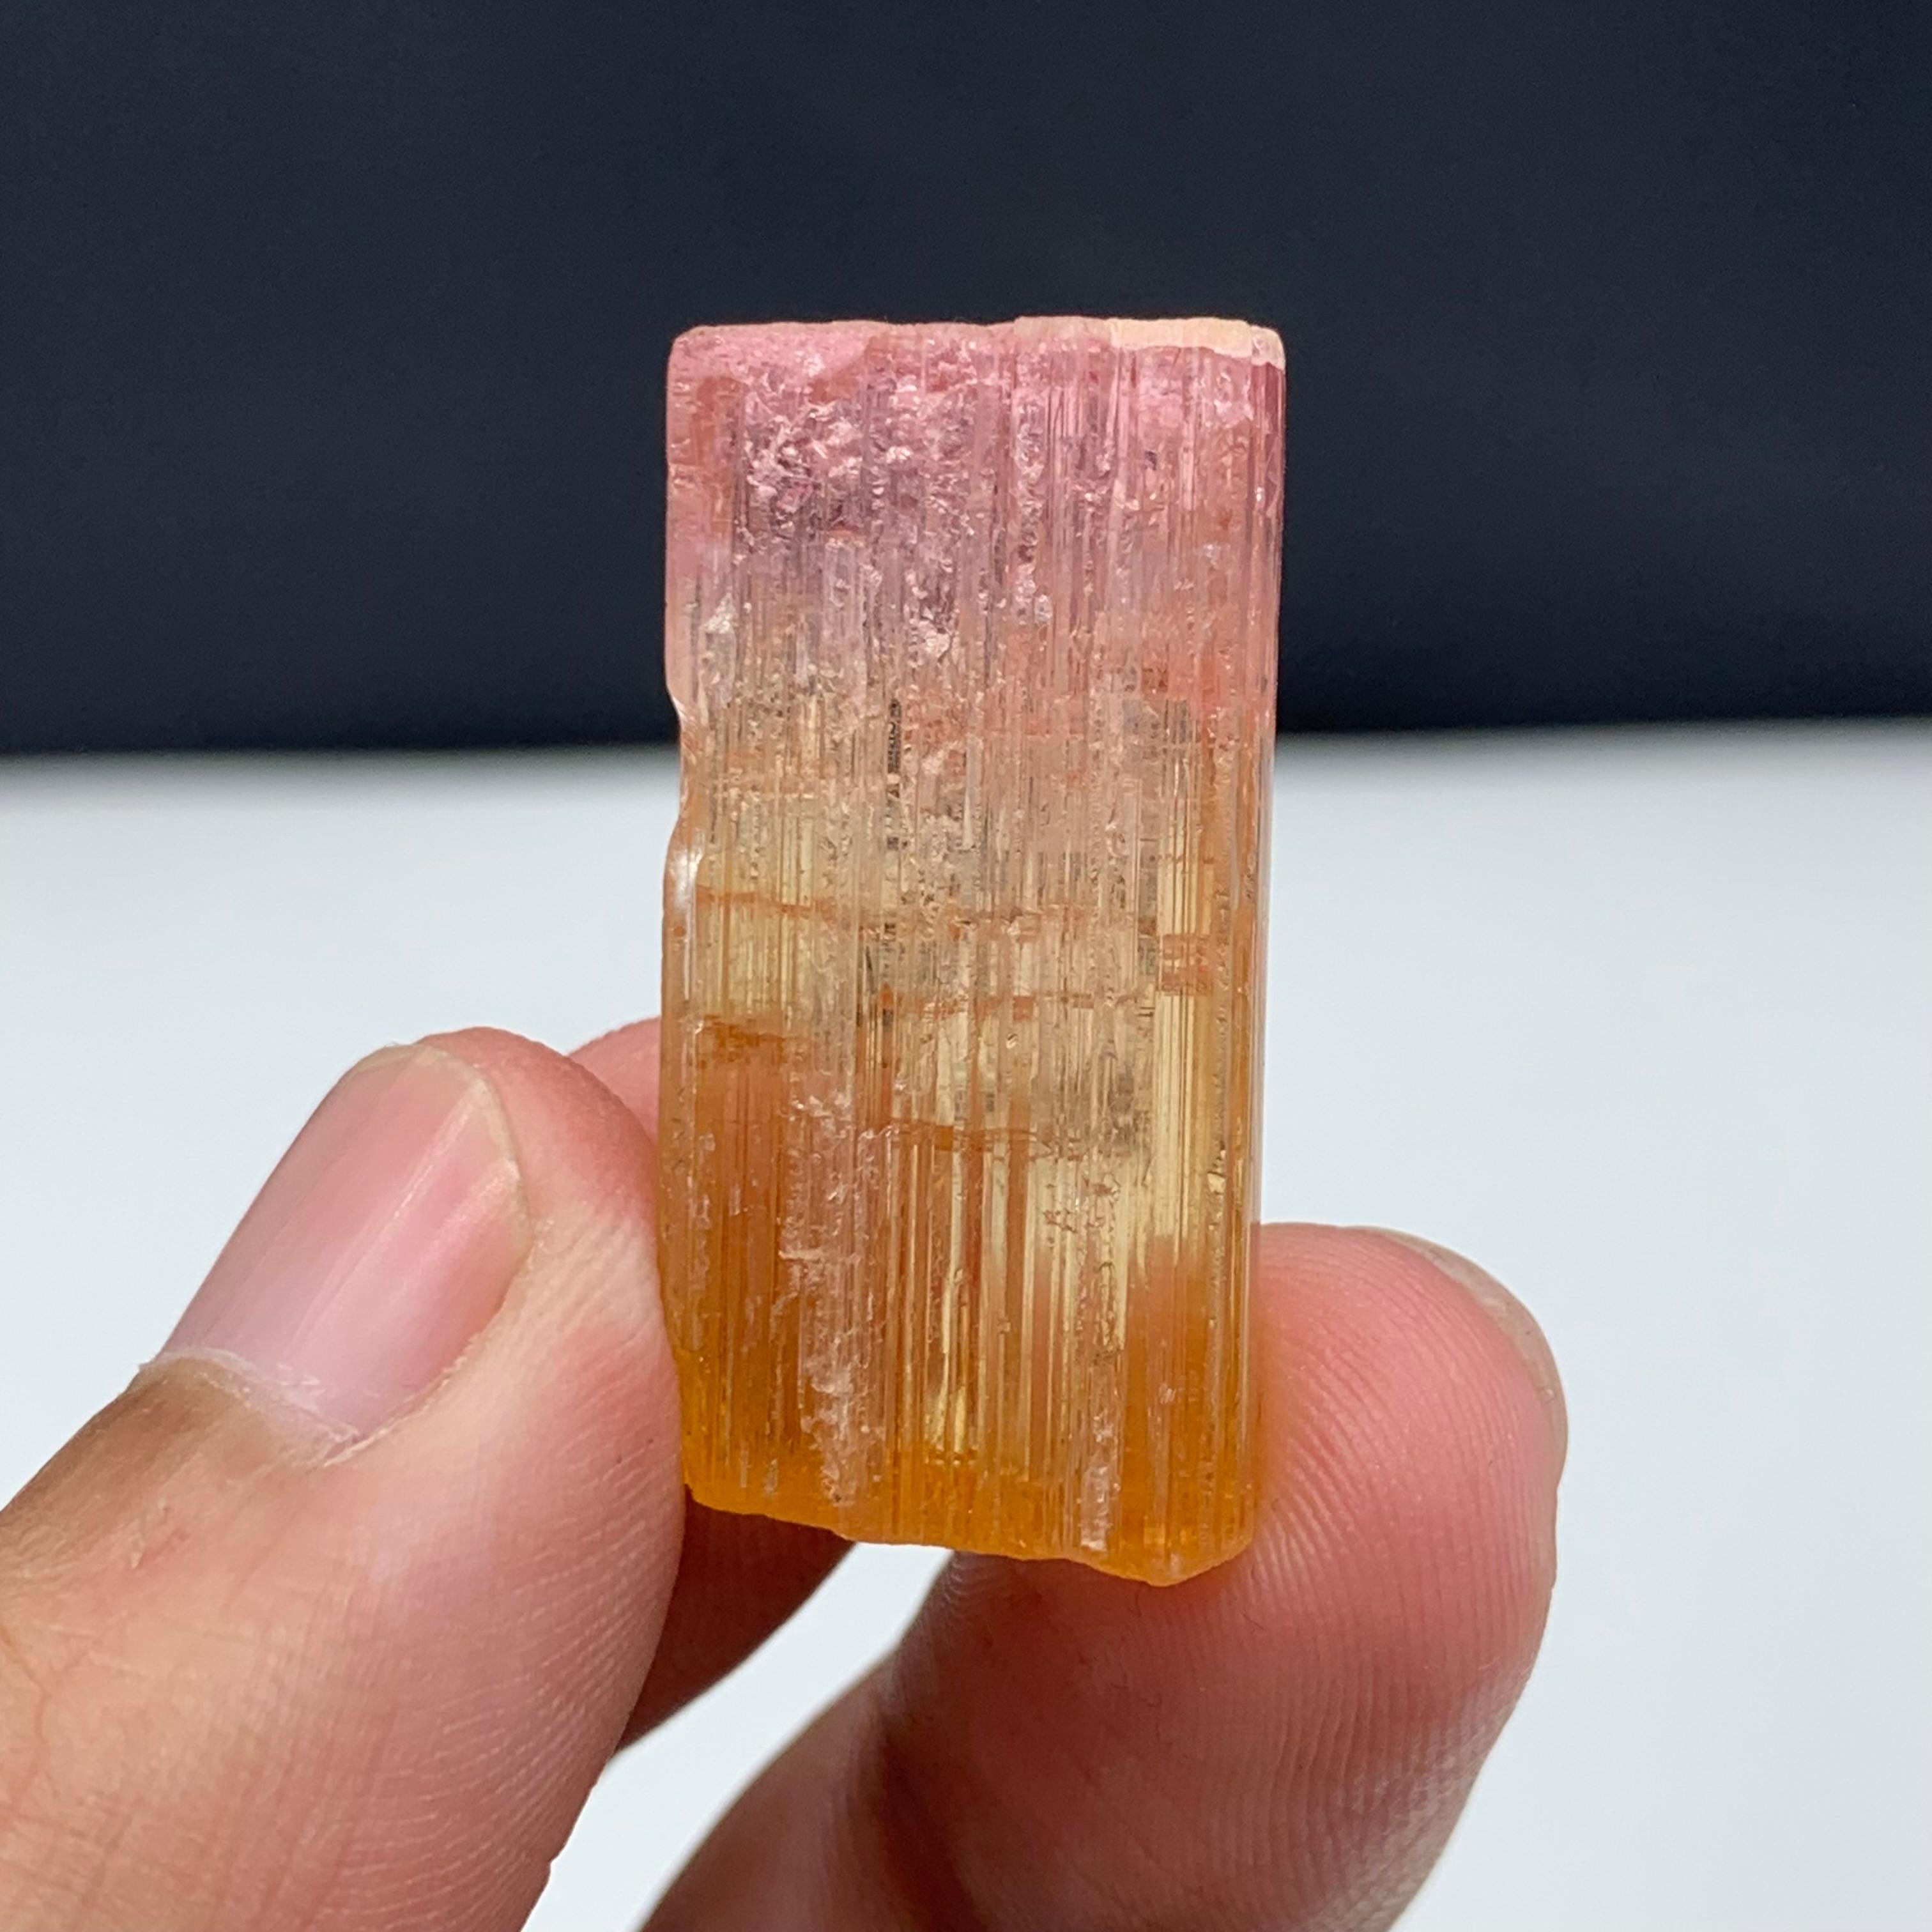 48 Carat Amazing Bi Color Tourmaline Crystal From Paprook Mine, Afghanistan For Sale 4